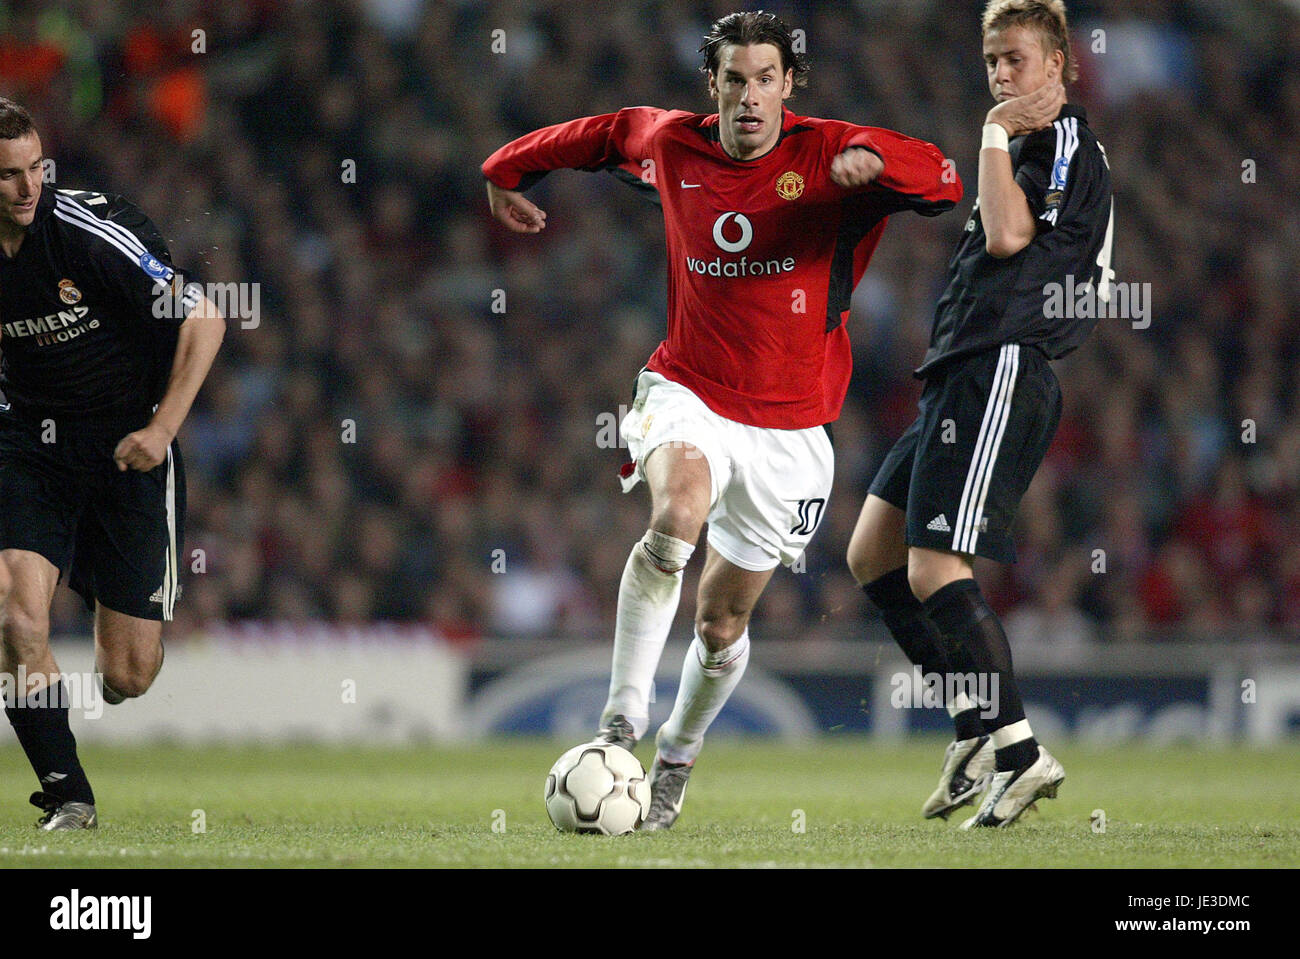 RUUD VAN NISTELROOY MANCHESTER UNITED FC OLD TRAFFORD MANCHESTER ENGLAND 20  November 2004 Stock Photo - Alamy